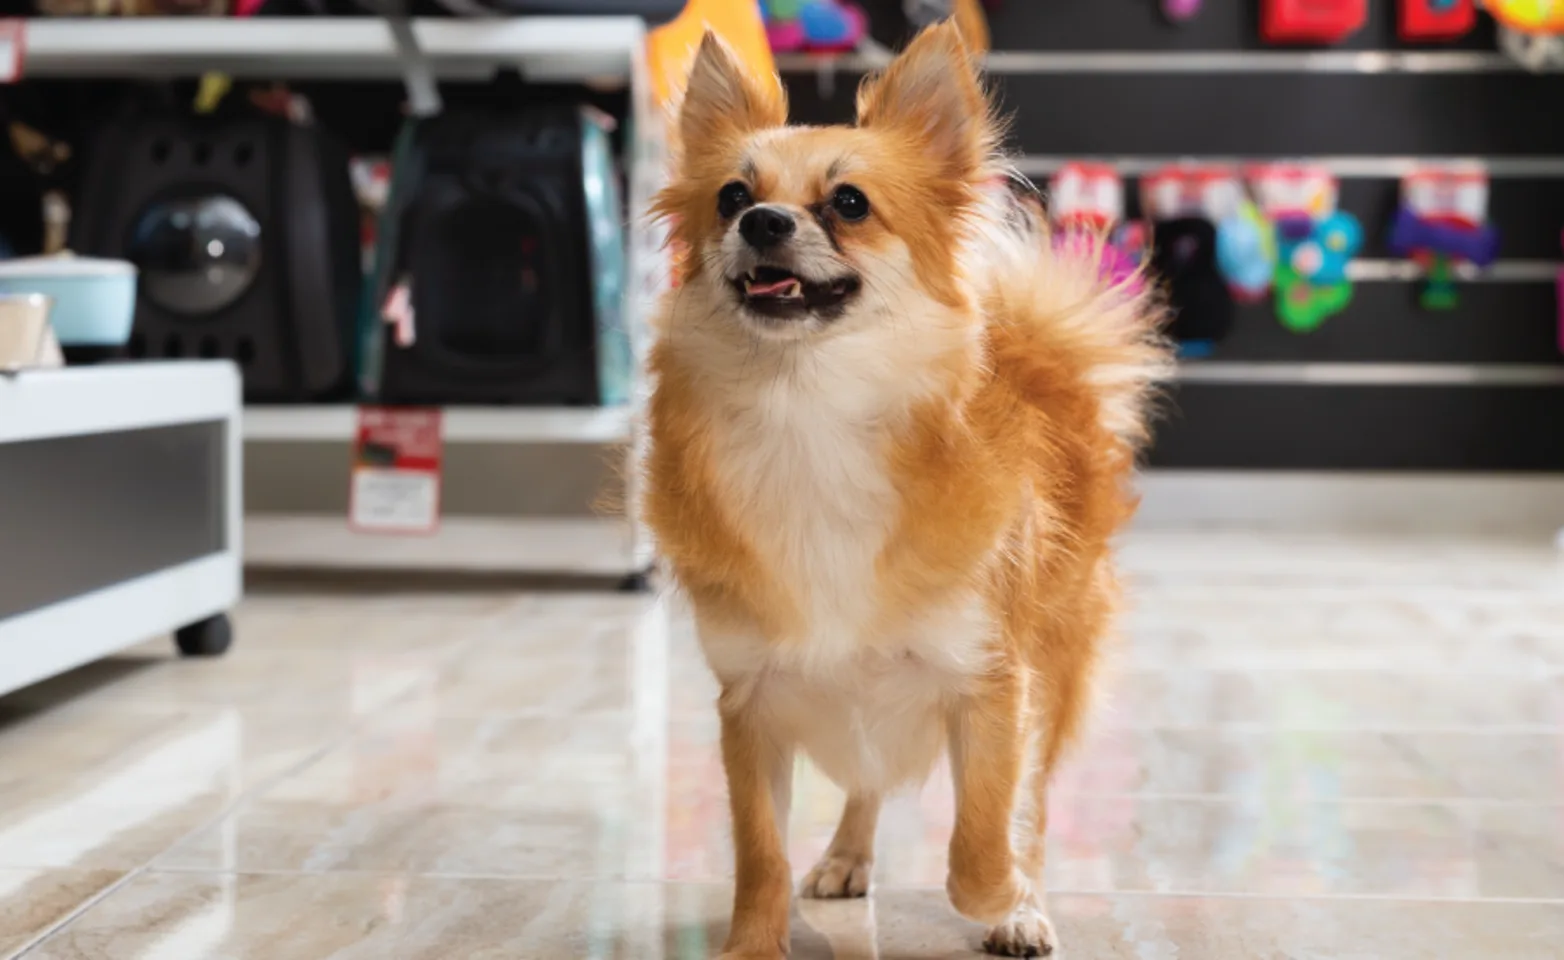 Small dog walking inside a store smiling up at the camera